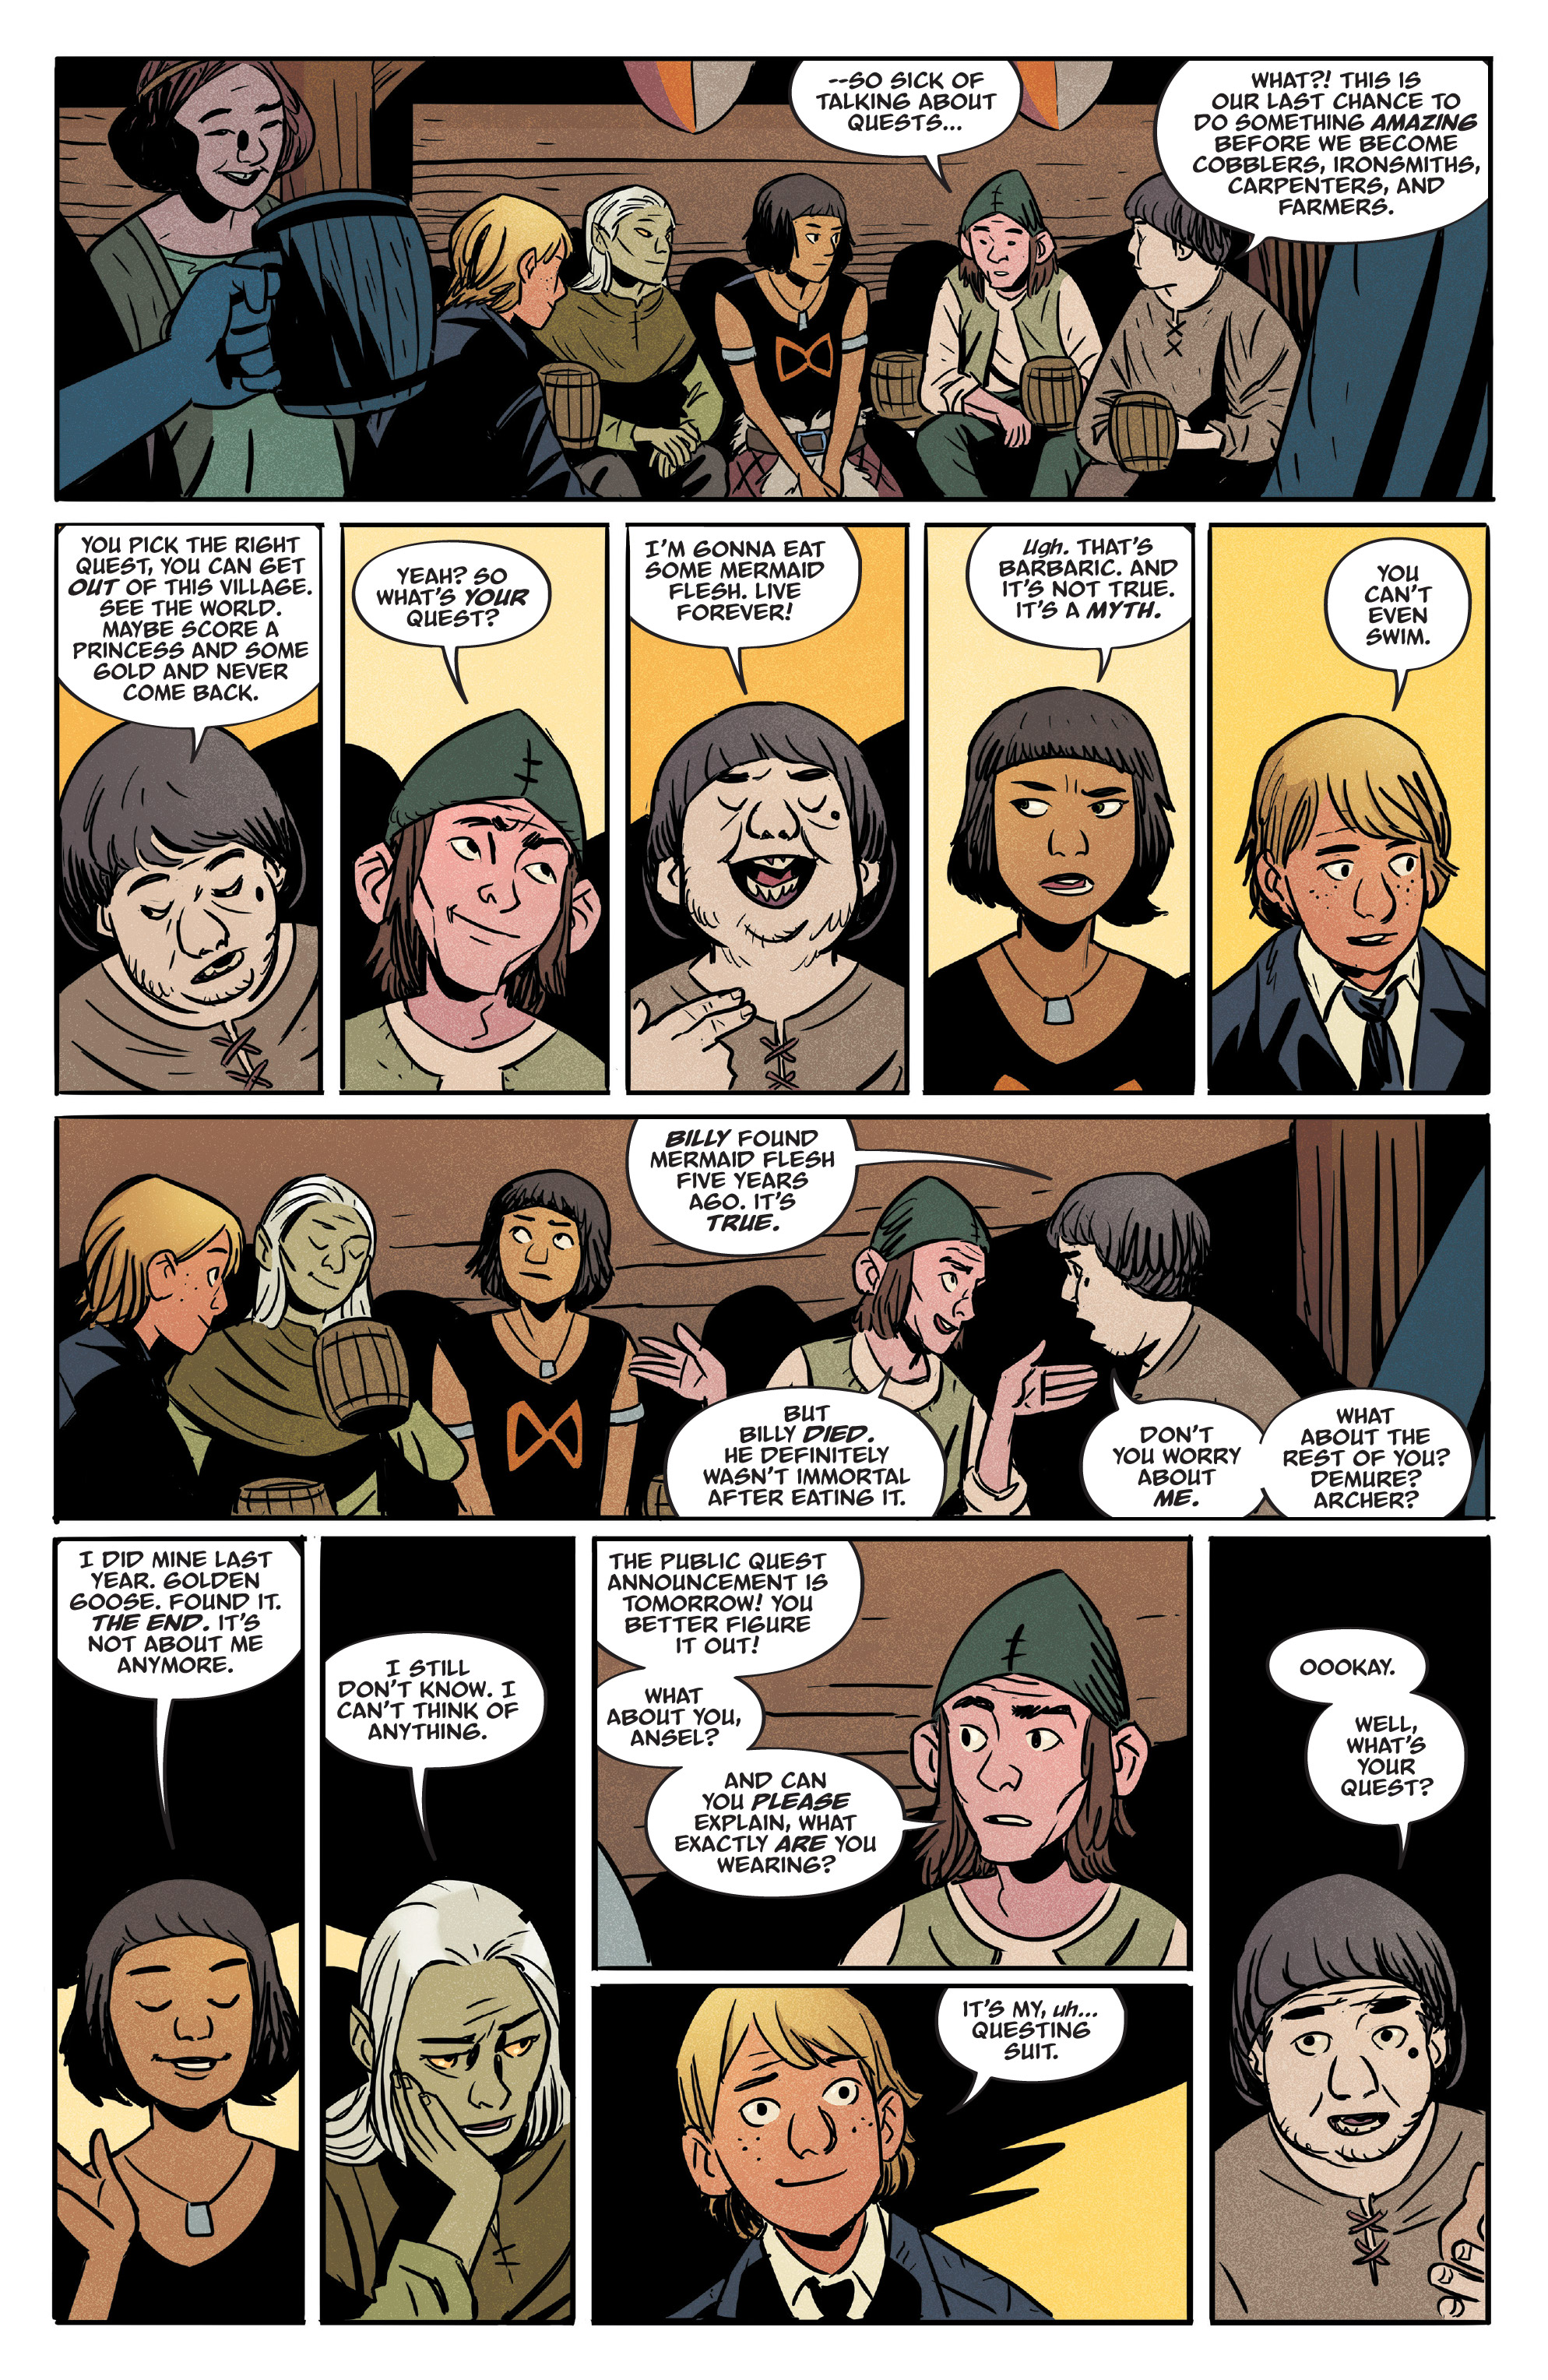 Folklords (2019-): Chapter 1 - Page 6